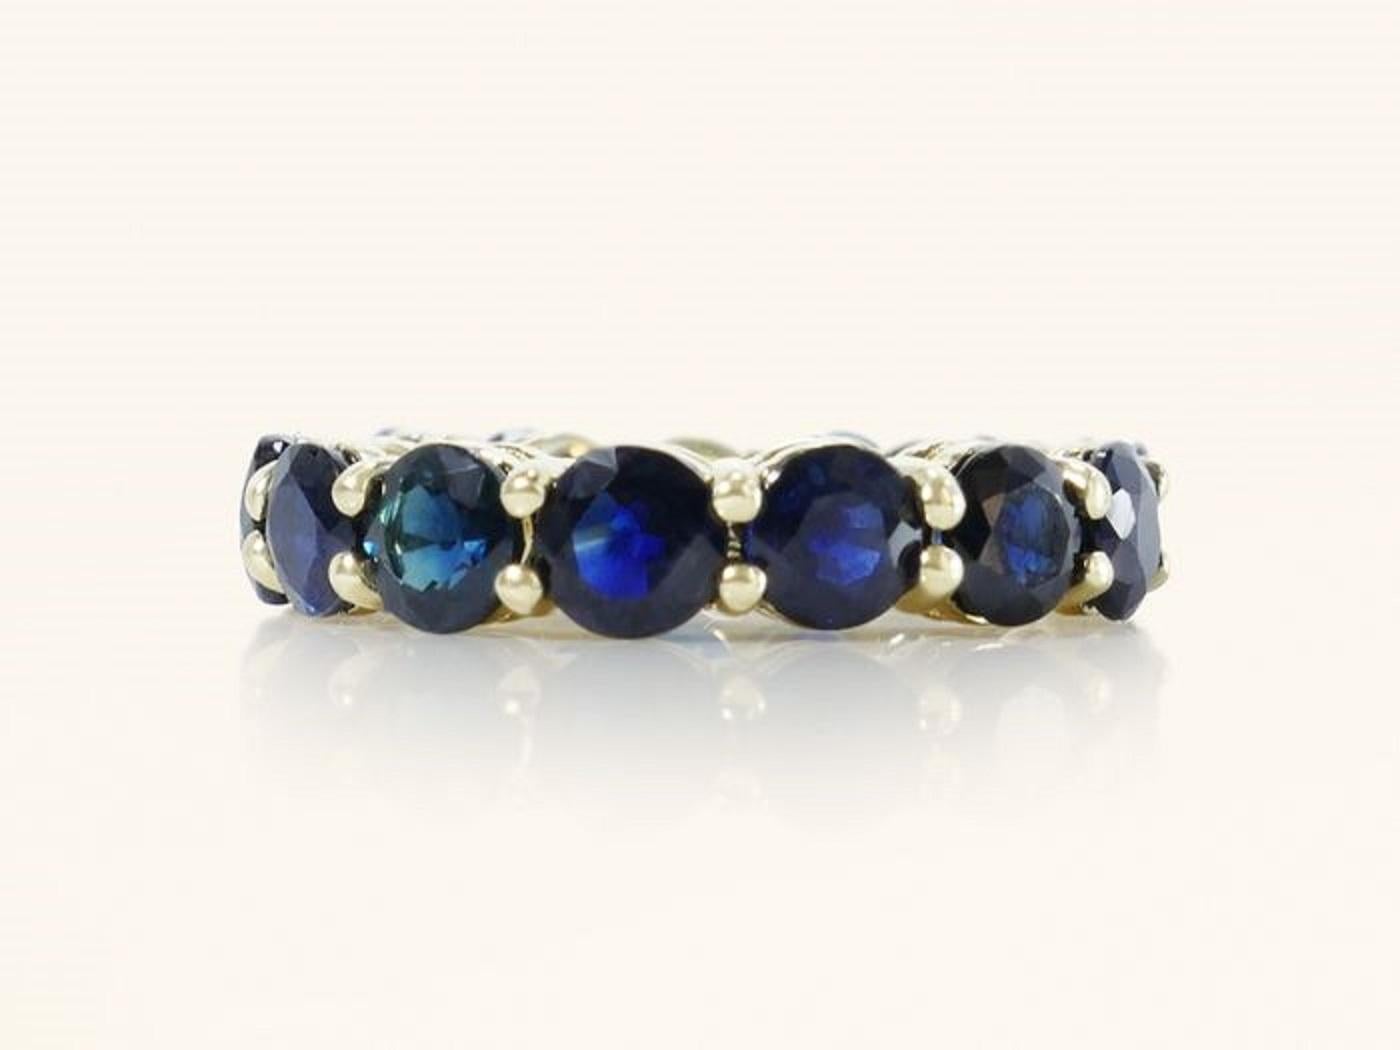 Center Natural Sapphire:
Weight: 7 ct / 15 stones
Colour: Blue
Shape: Round Mixed Cut